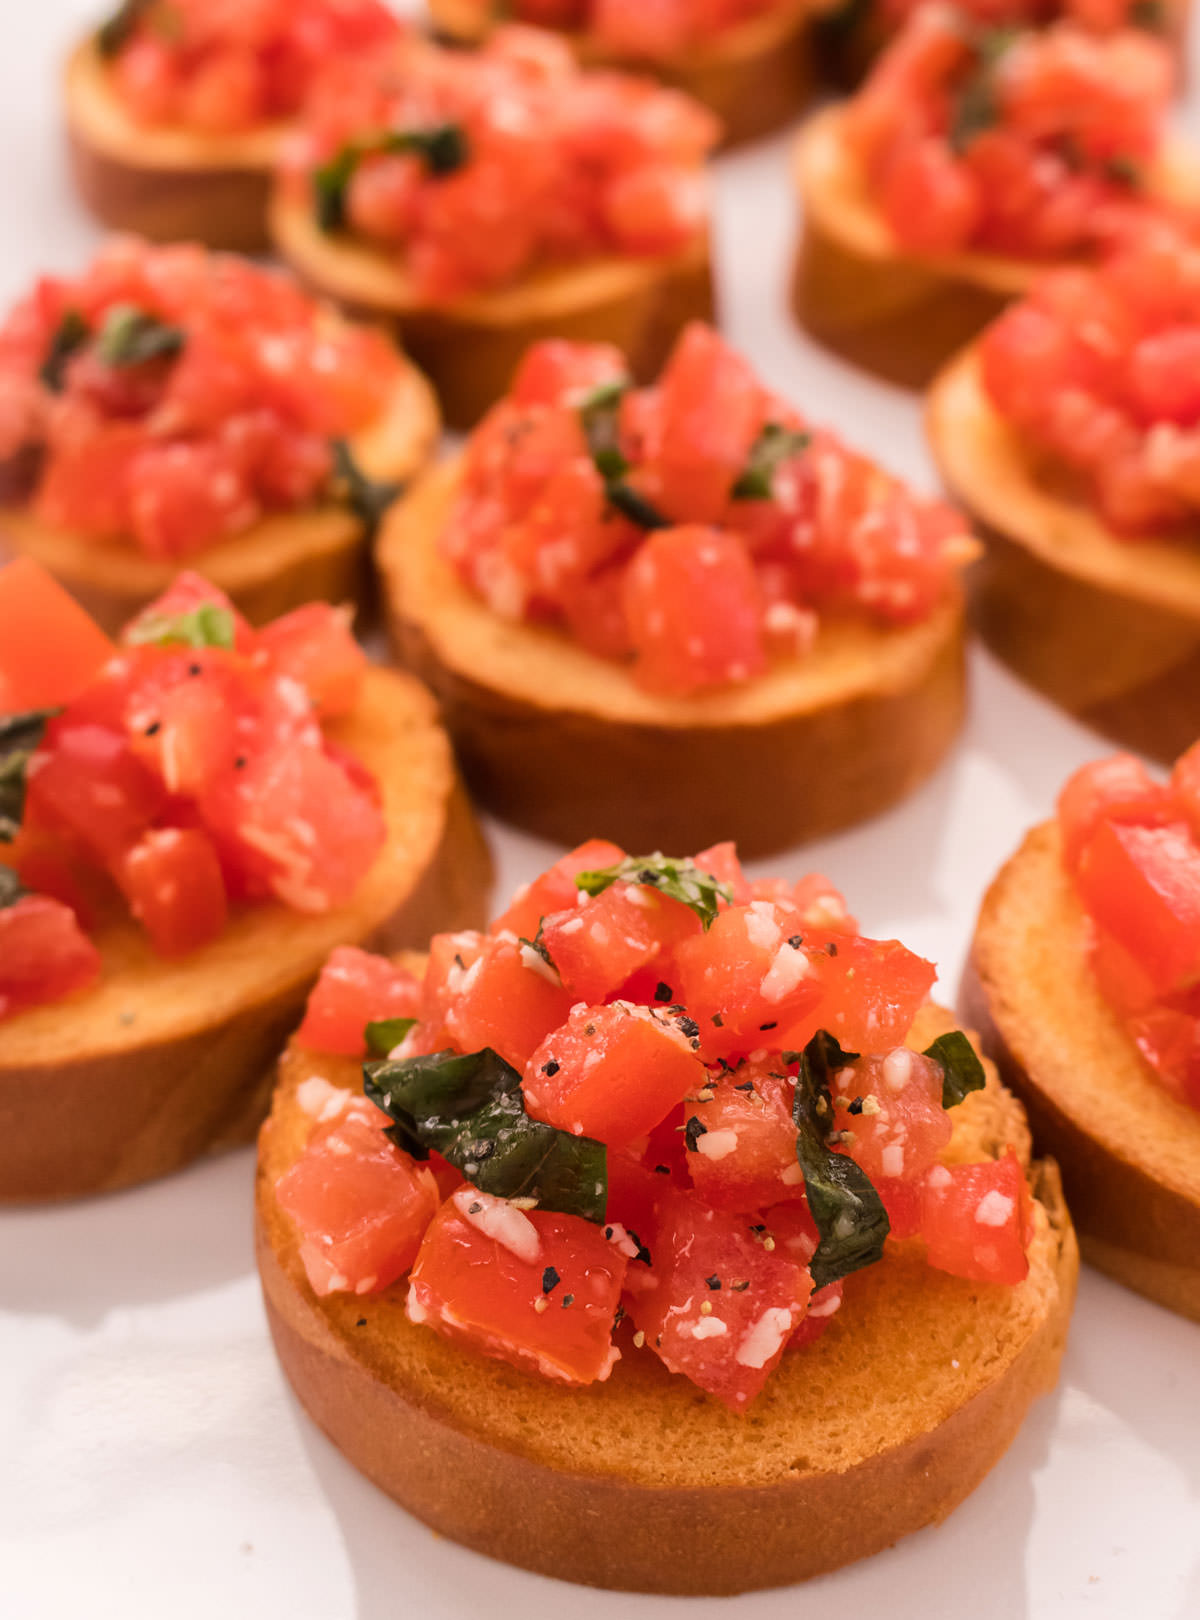 A plateful of Bruschetta appetizers ready for a party.